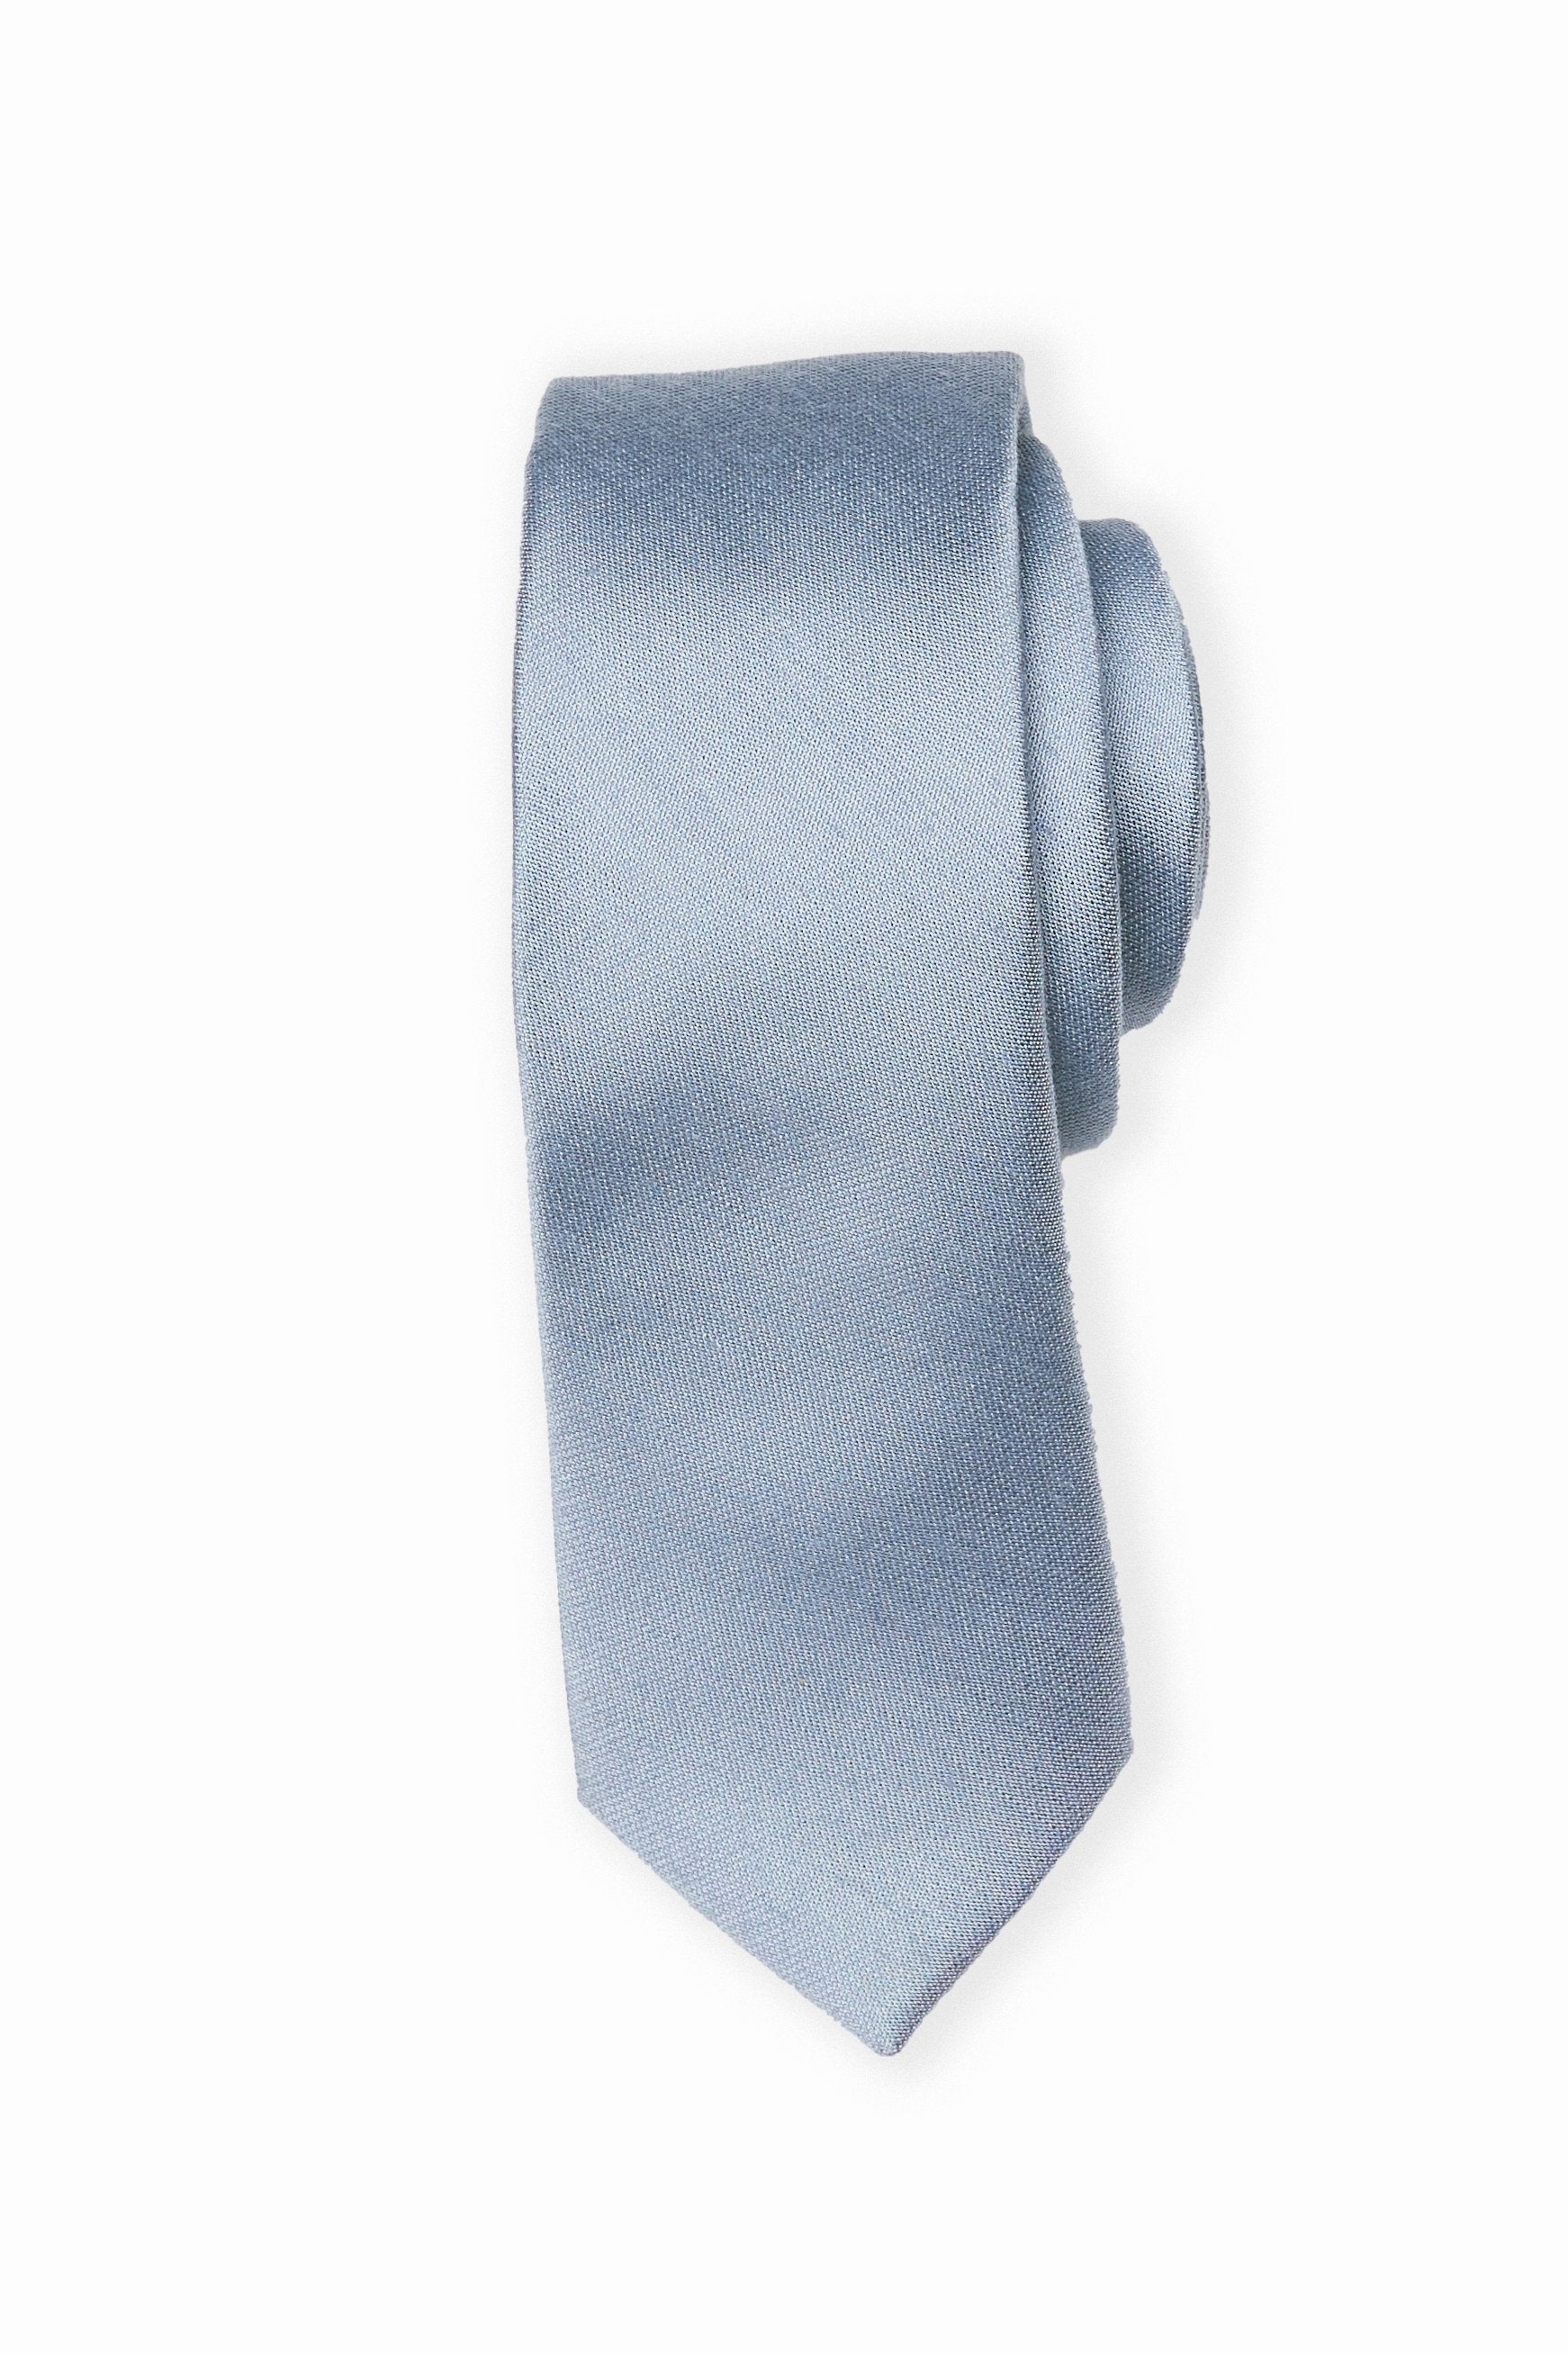 Front closeup view of the Simon Necktie in dusty blue rolled up with the pointed necktie end extended showing the material texture and sheen.